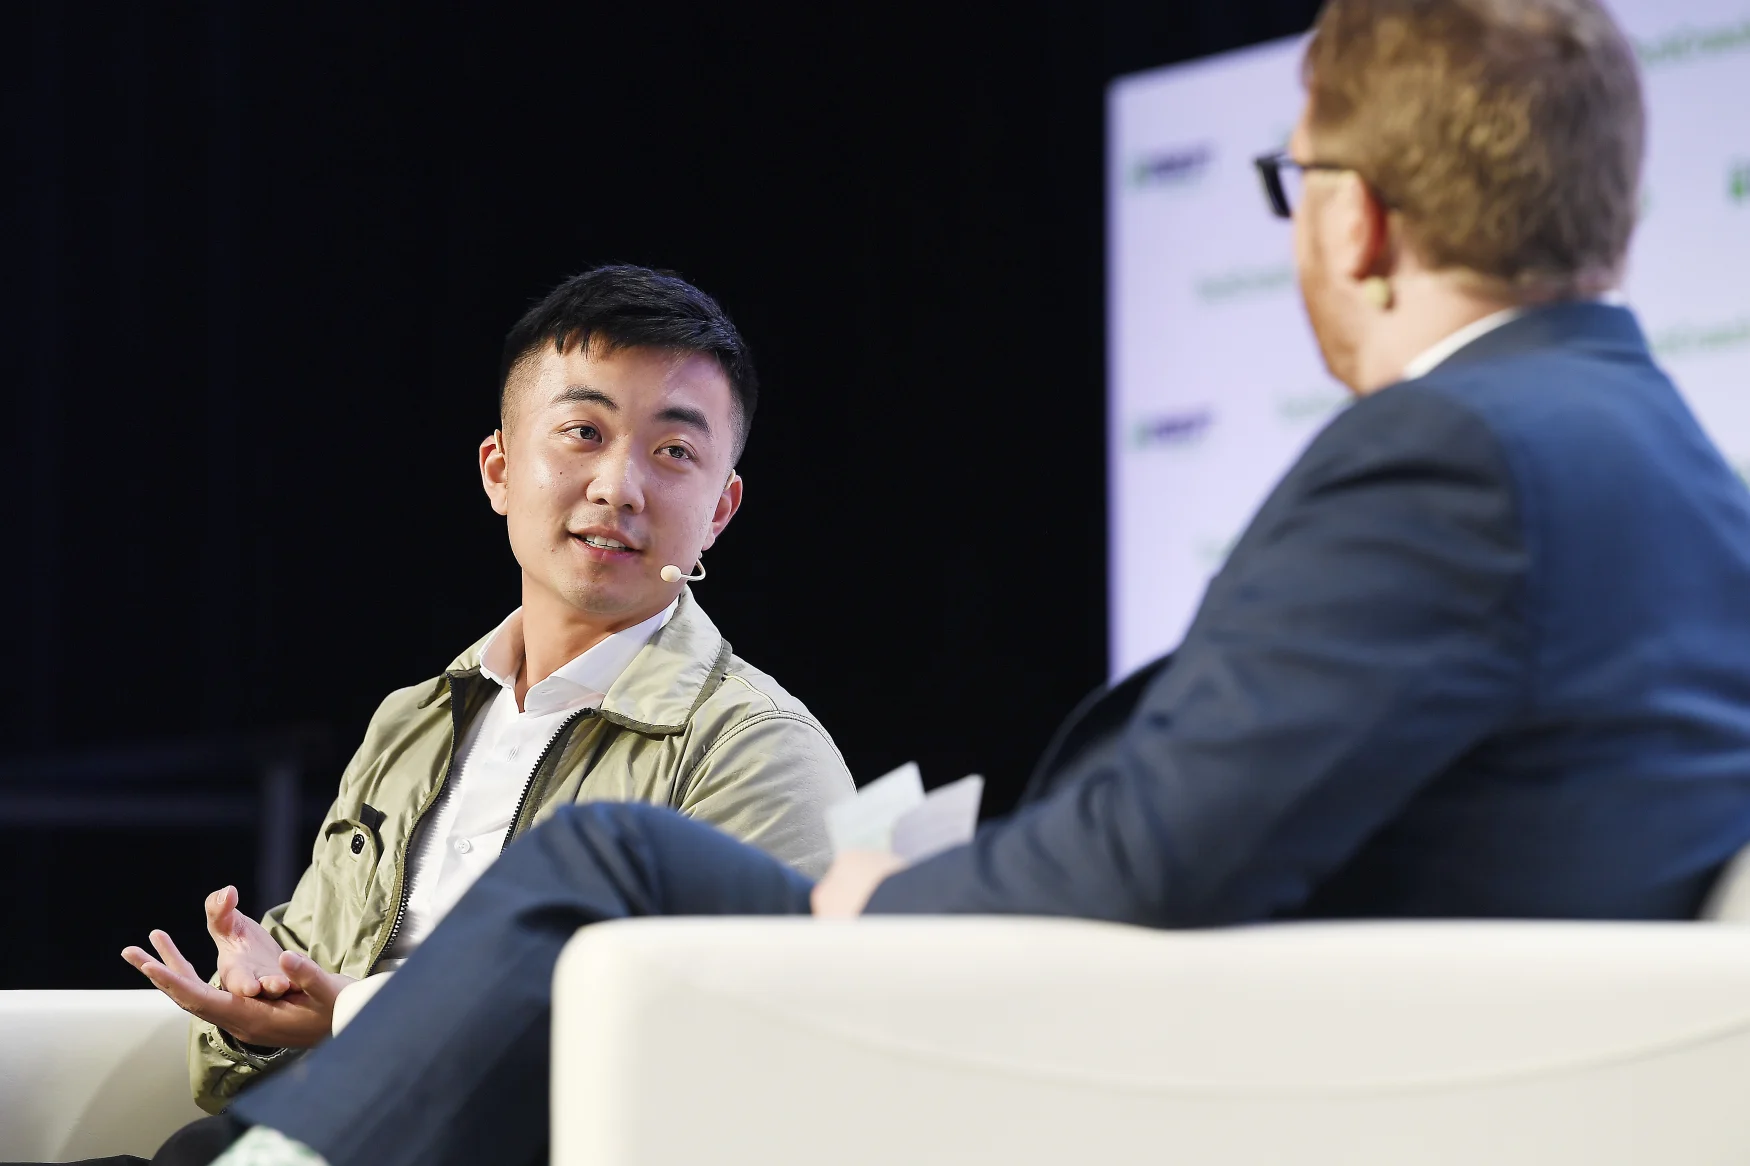 SAN FRANCISCO, CALIFORNIA - OCTOBER 04: (L-R) OnePlus Co-founder Carl Pei and TechCrunch Hardware Editor Brian Heater speak onstage during TechCrunch Disrupt San Francisco 2019 at Moscone Convention Center on October 04, 2019 in San Francisco, California. (Photo by Steve Jennings/Getty Images for TechCrunch)